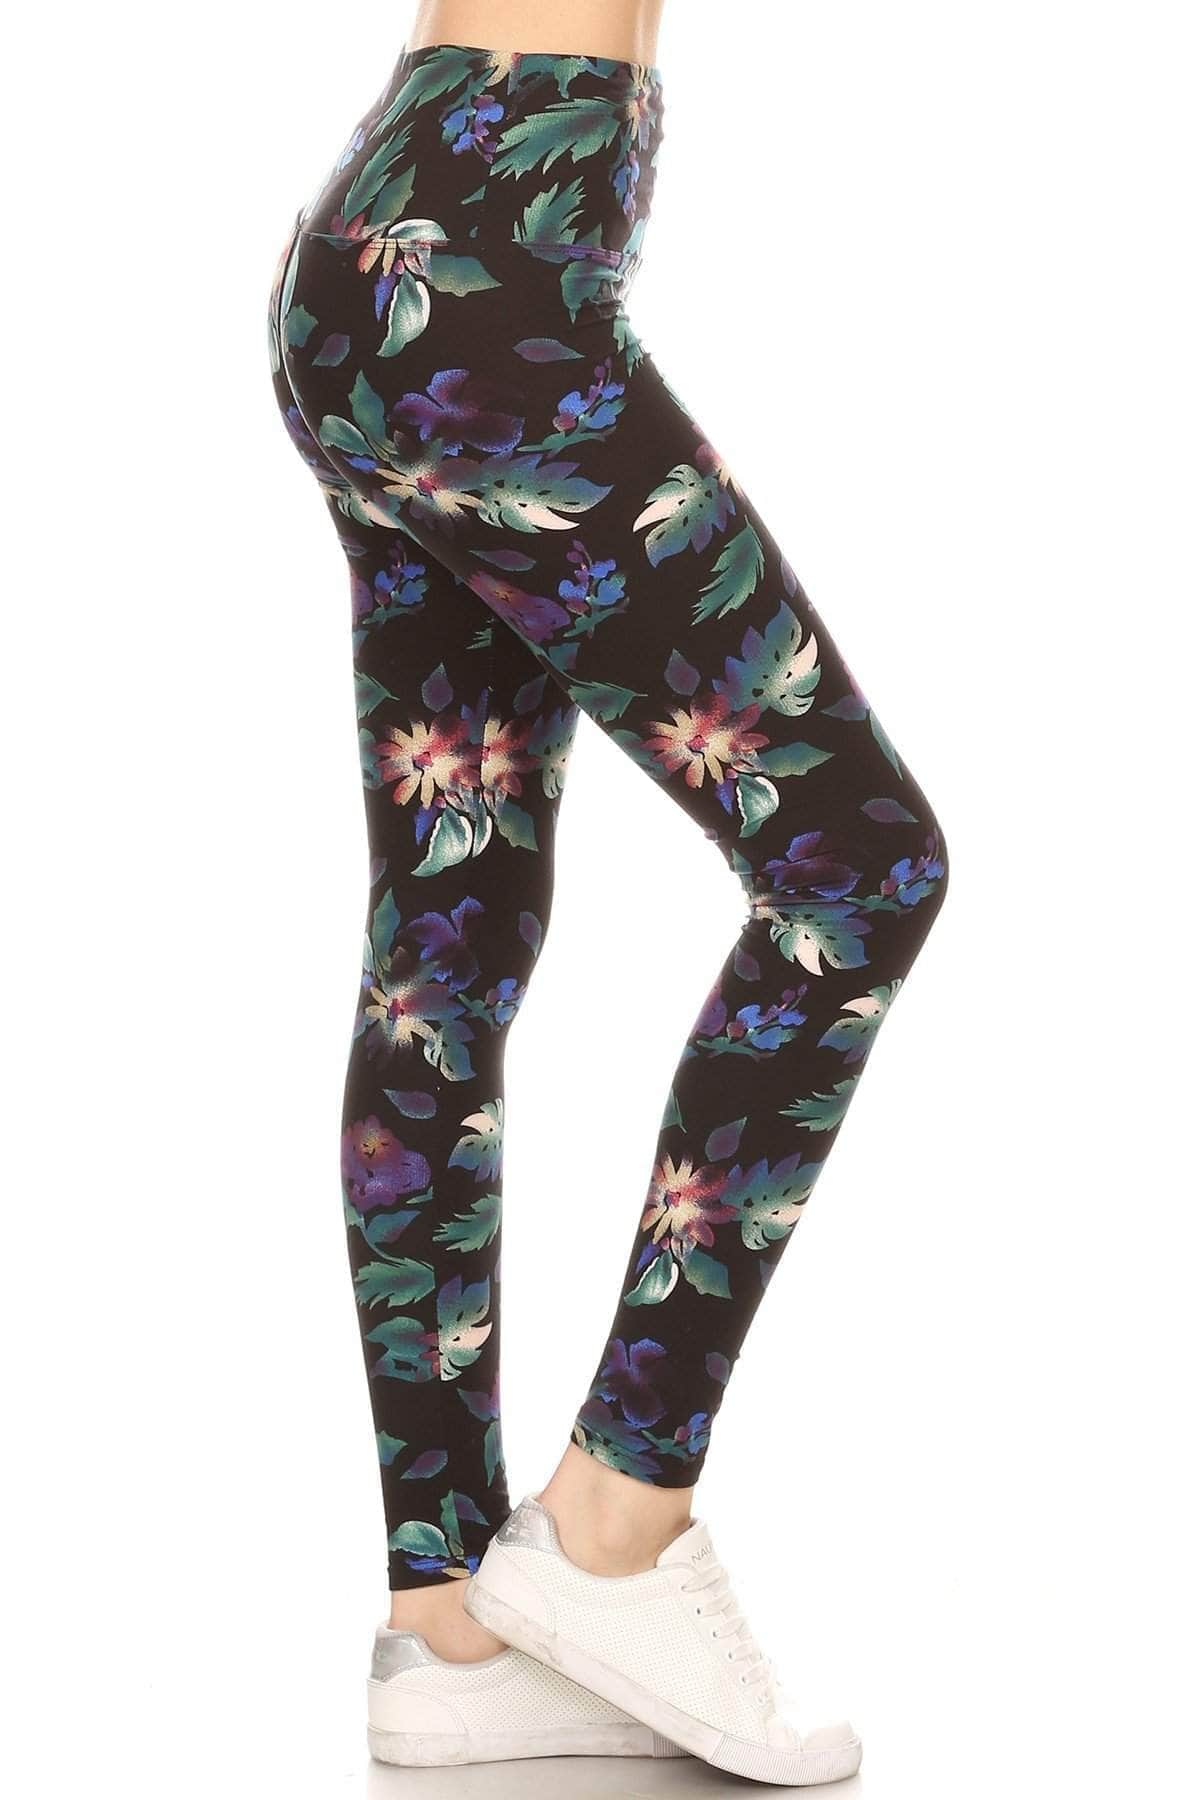 Long Yoga Style Banded Lined Floral Printed Knit Legging With High Waist Blue Zone Planet